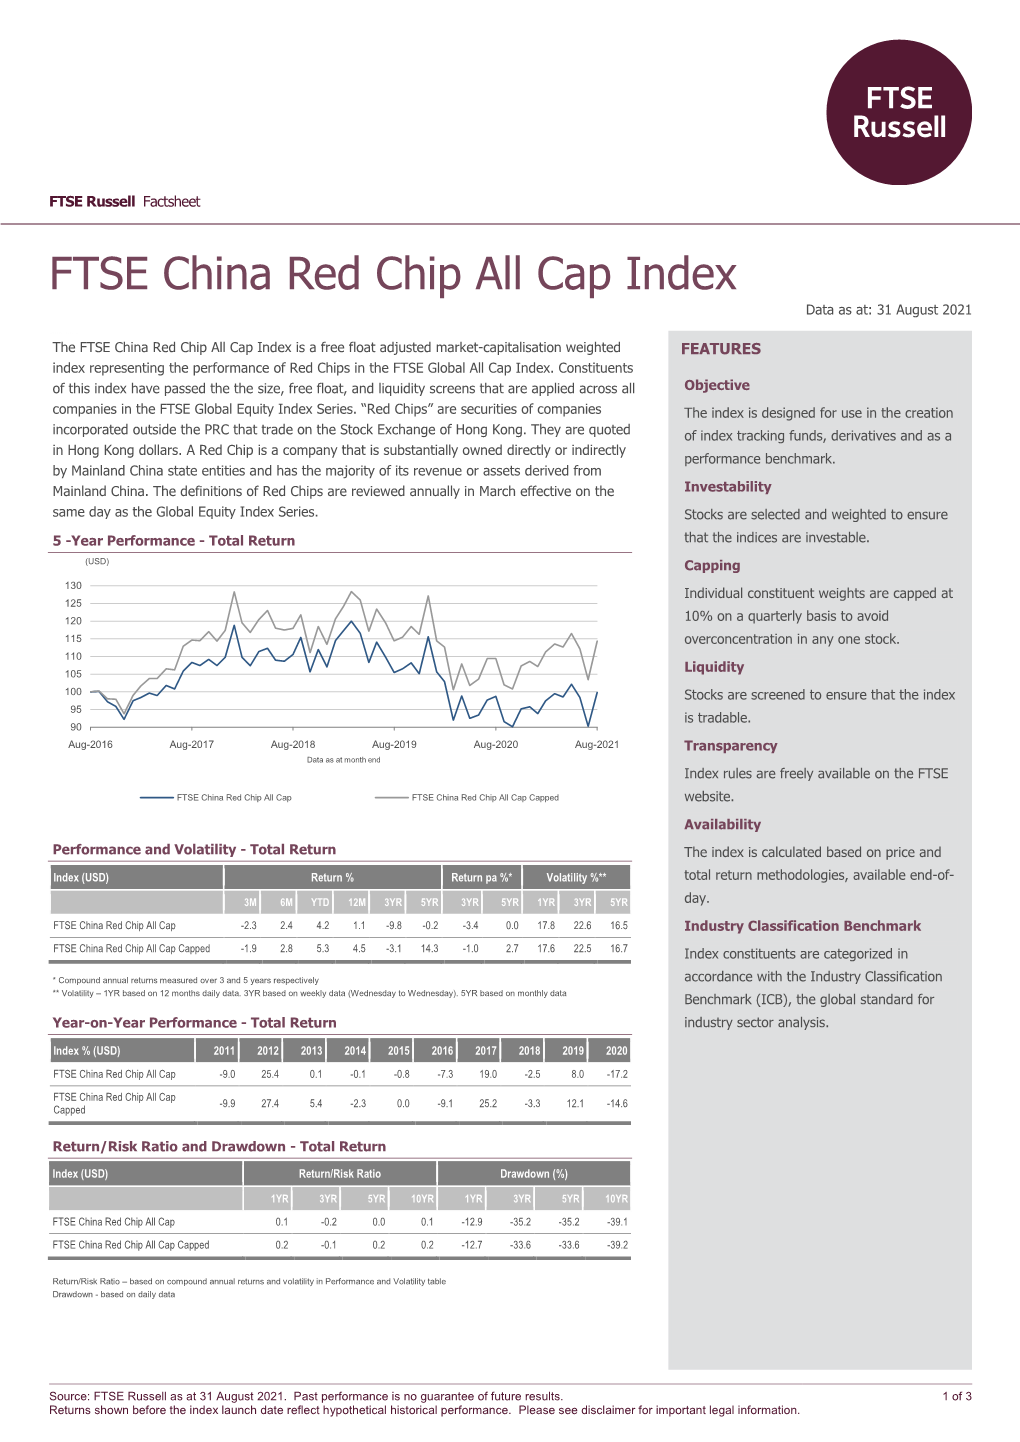 FTSE China Red Chip All Cap Index